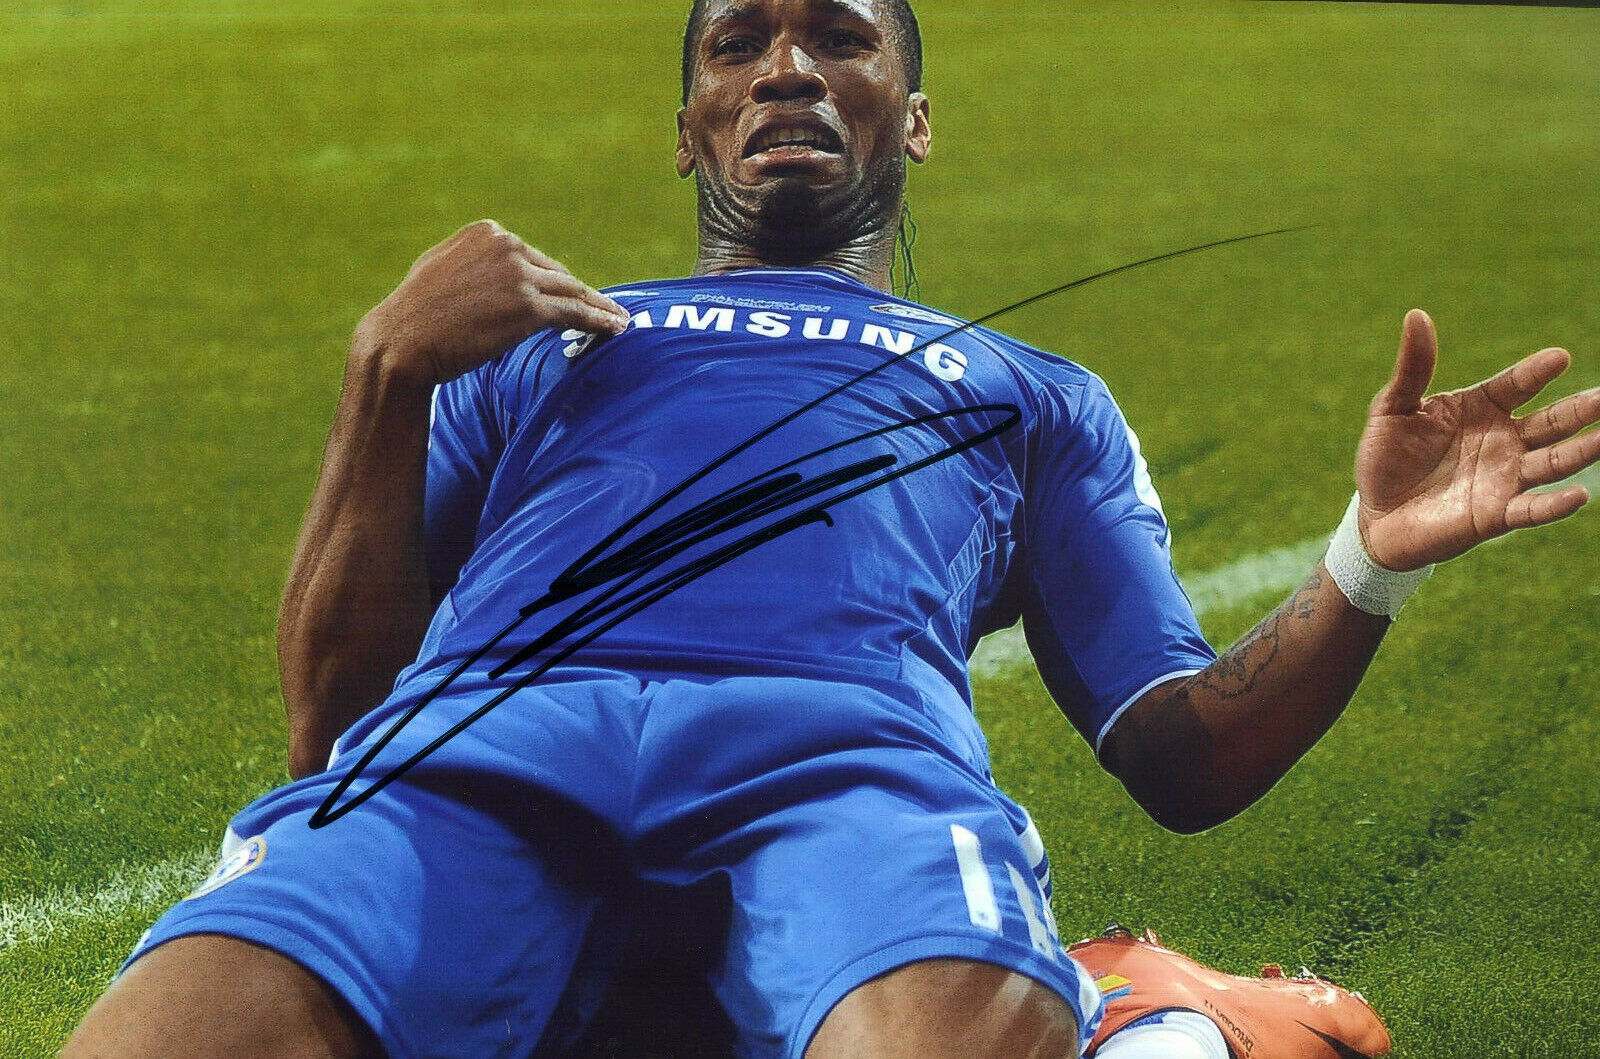 DIDIER DROGBA Signed Photo Poster paintinggraph - Chelsea / Ivory Coast player - Preprint